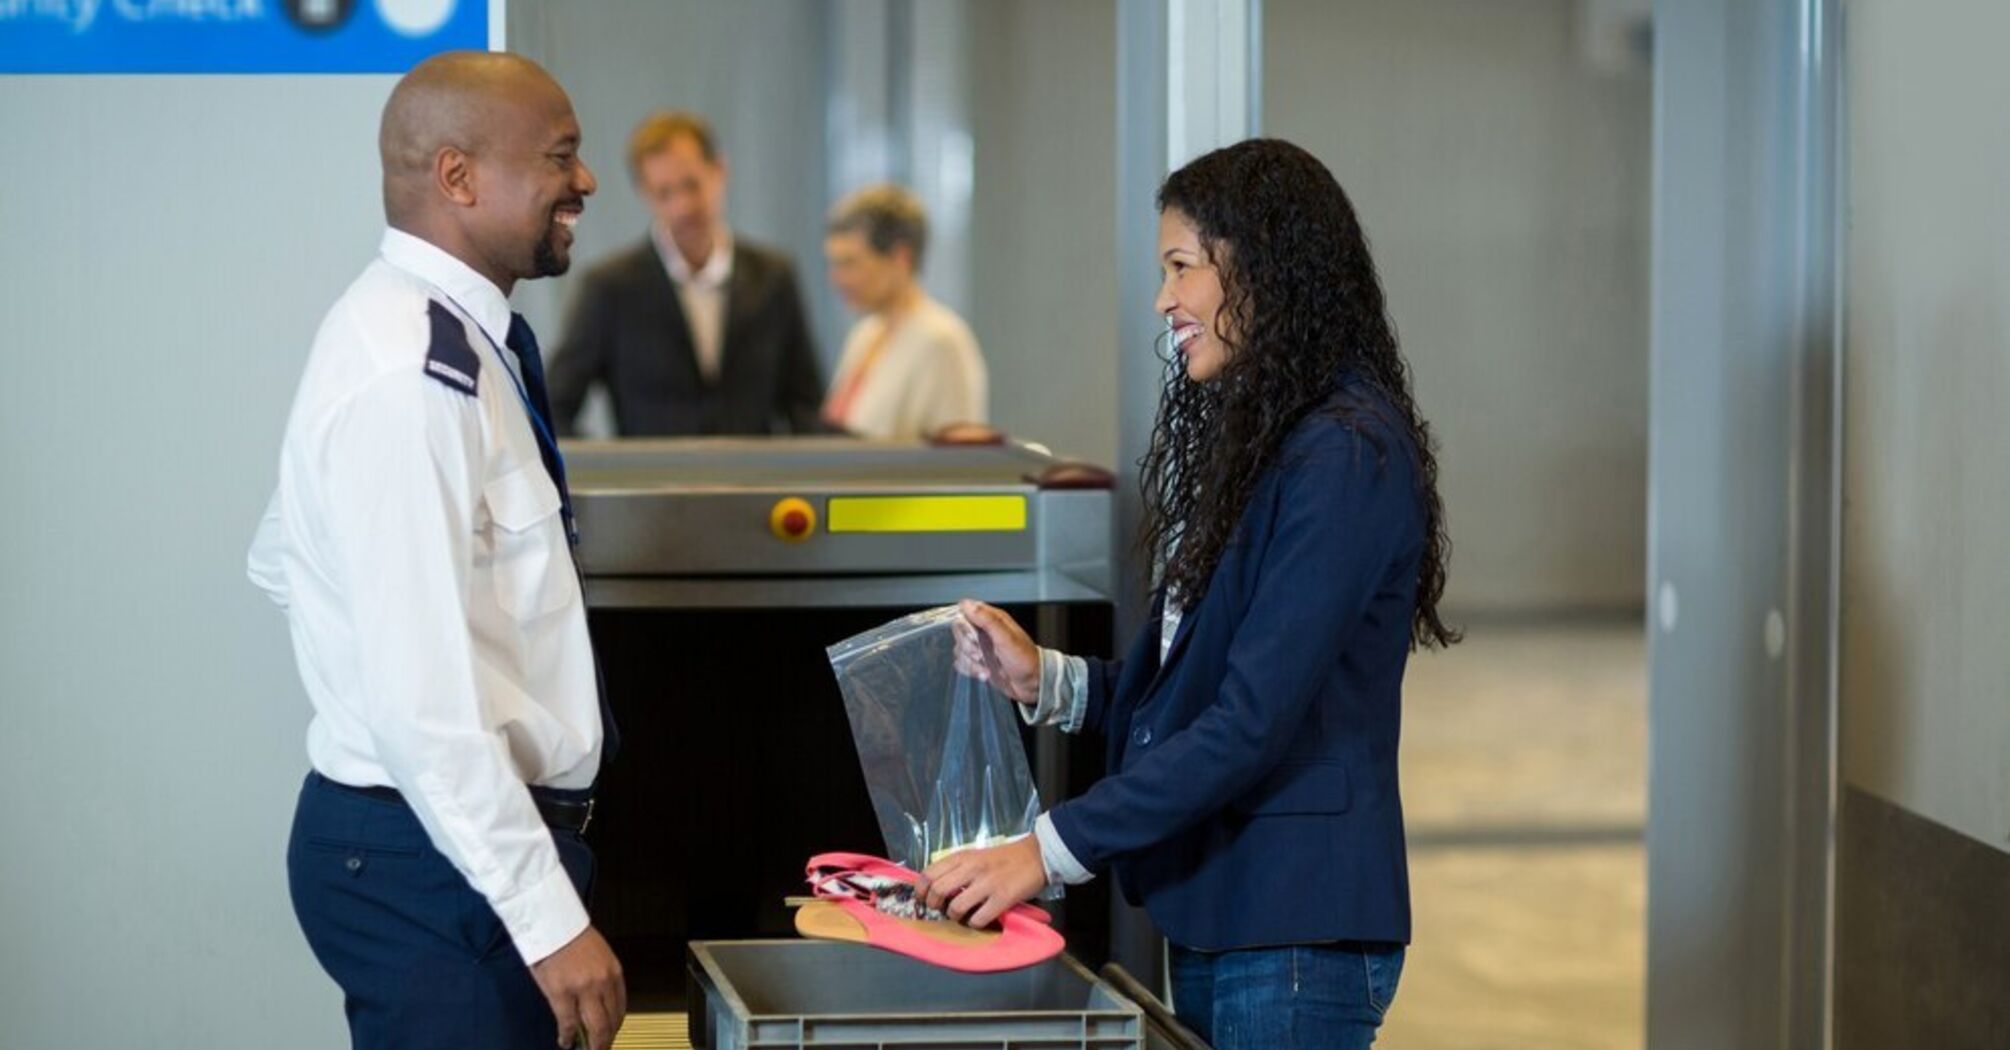 Passing through airport security: two mistakes most commonly made by passengers